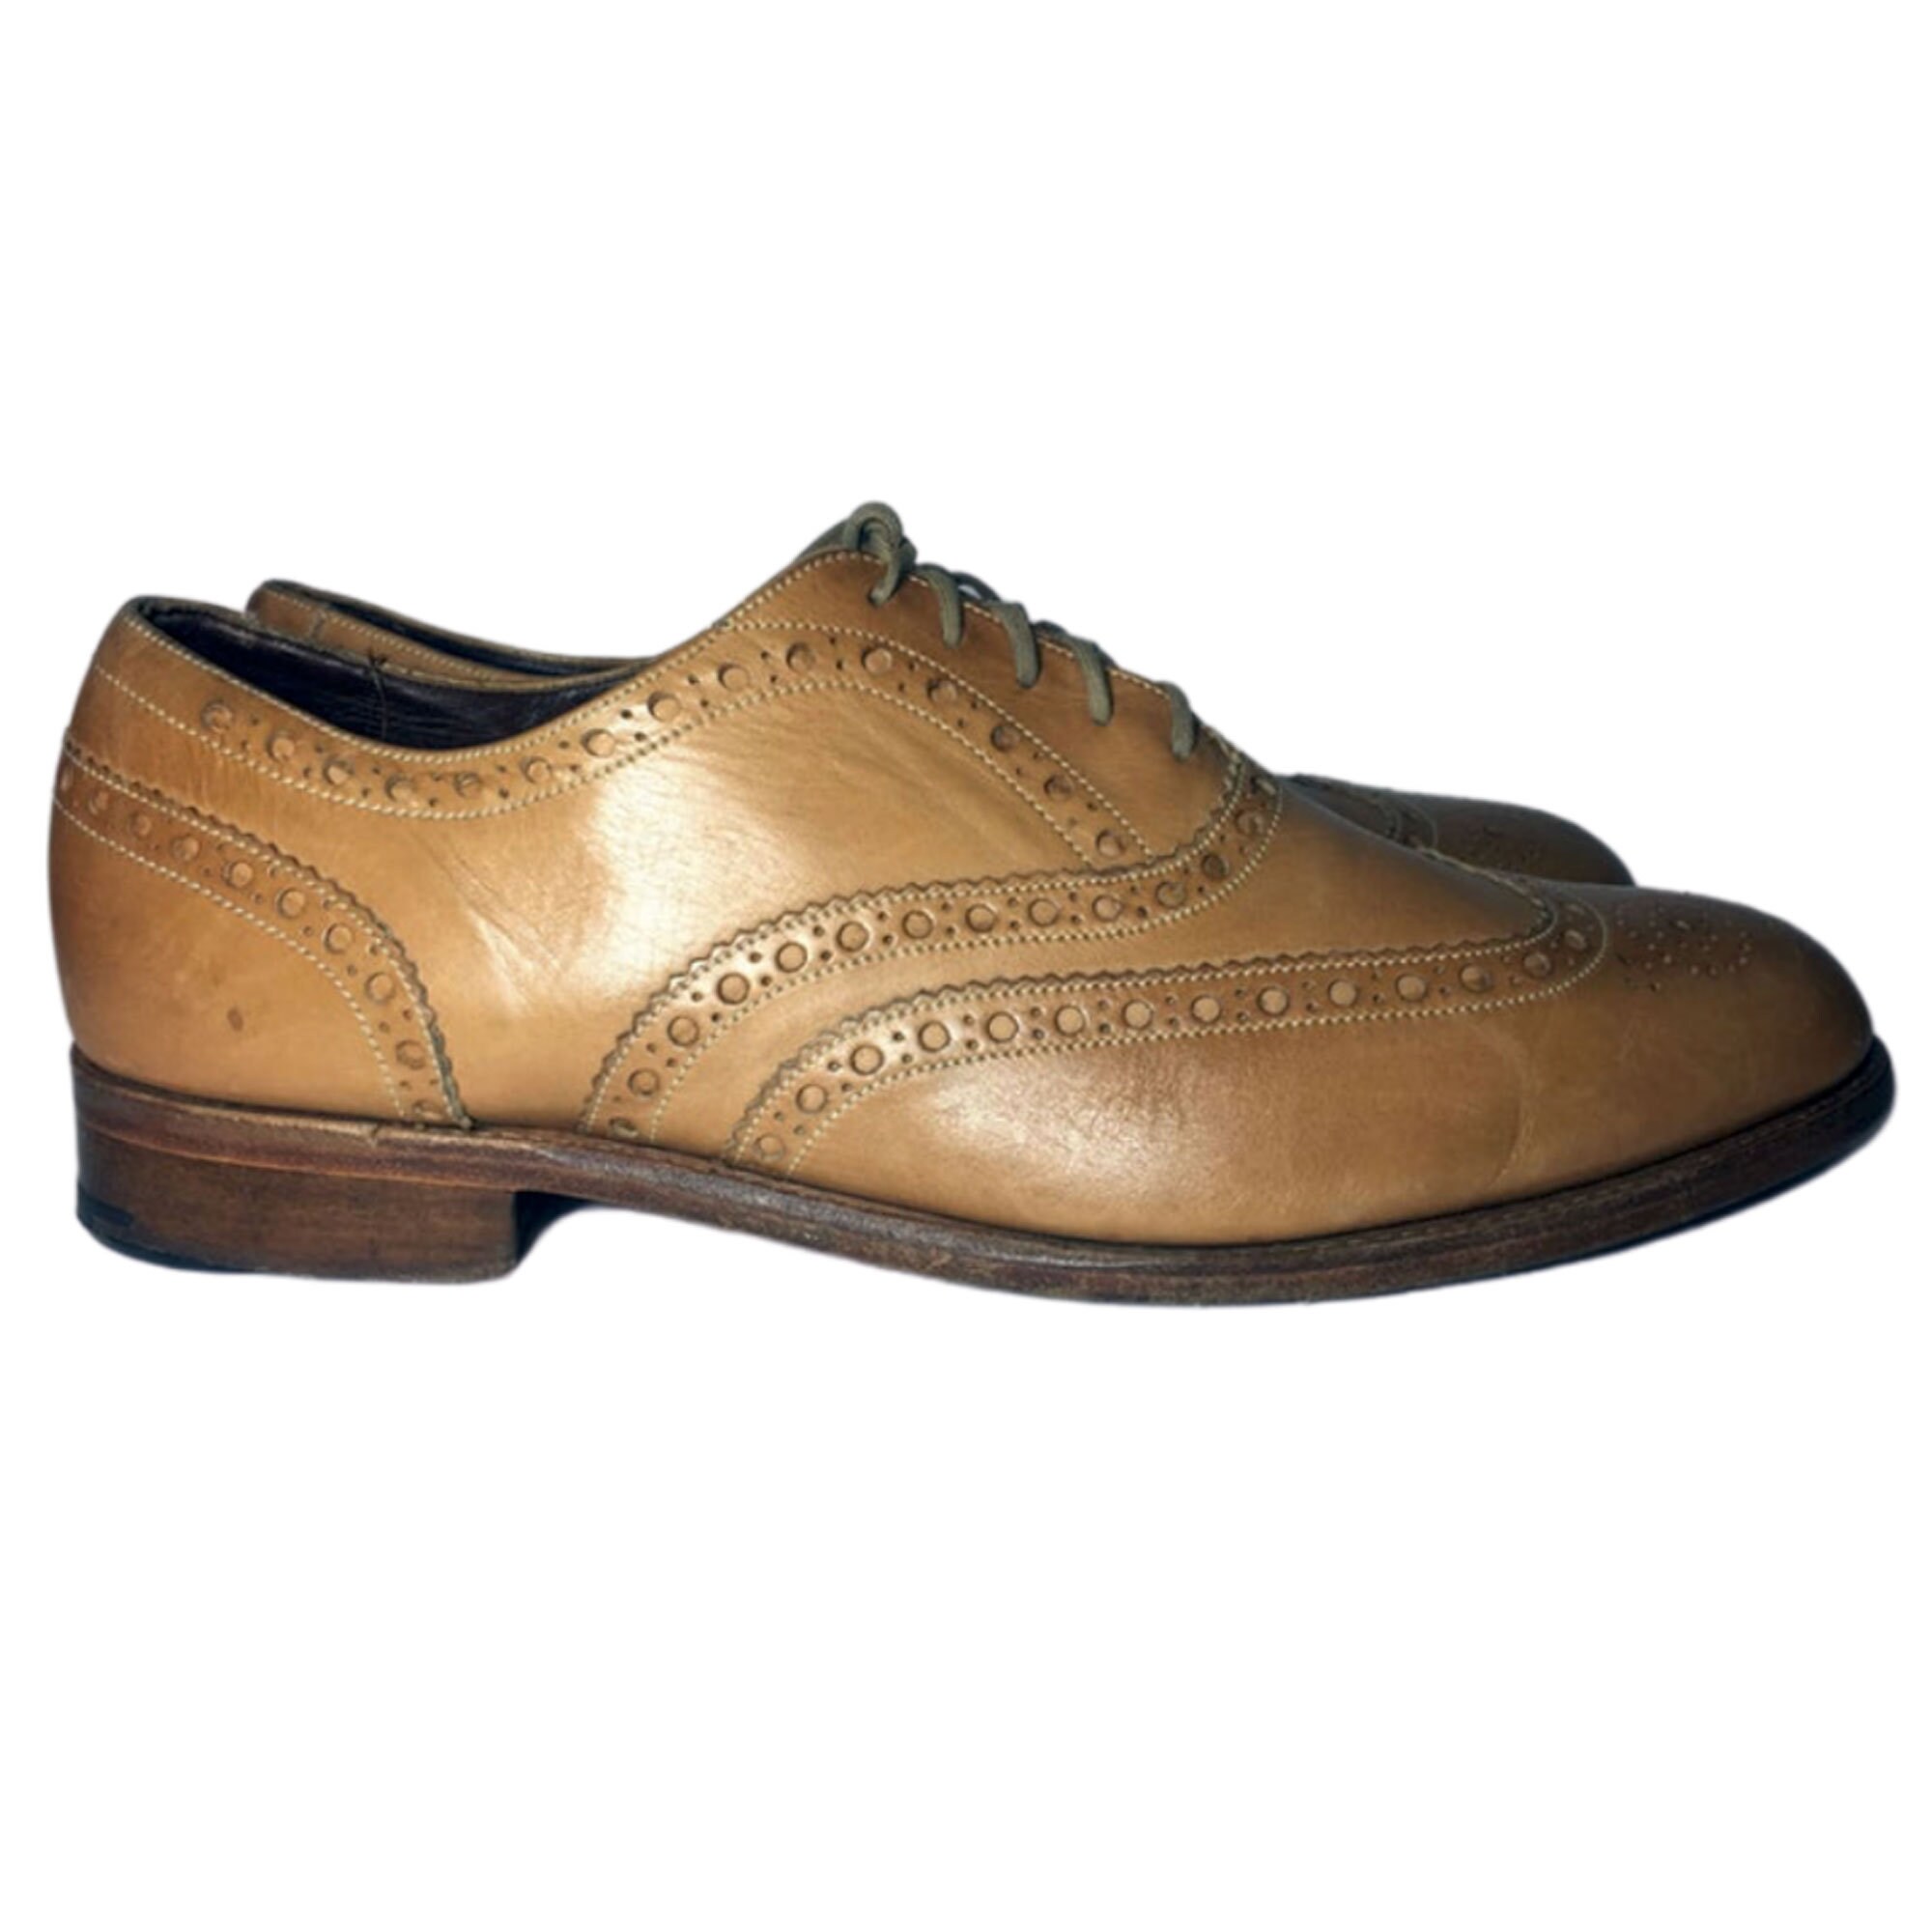 CHARLES TYRWHITT Brown Leather Wingtip Men's Shoes Size 12 Beige Oxford ...